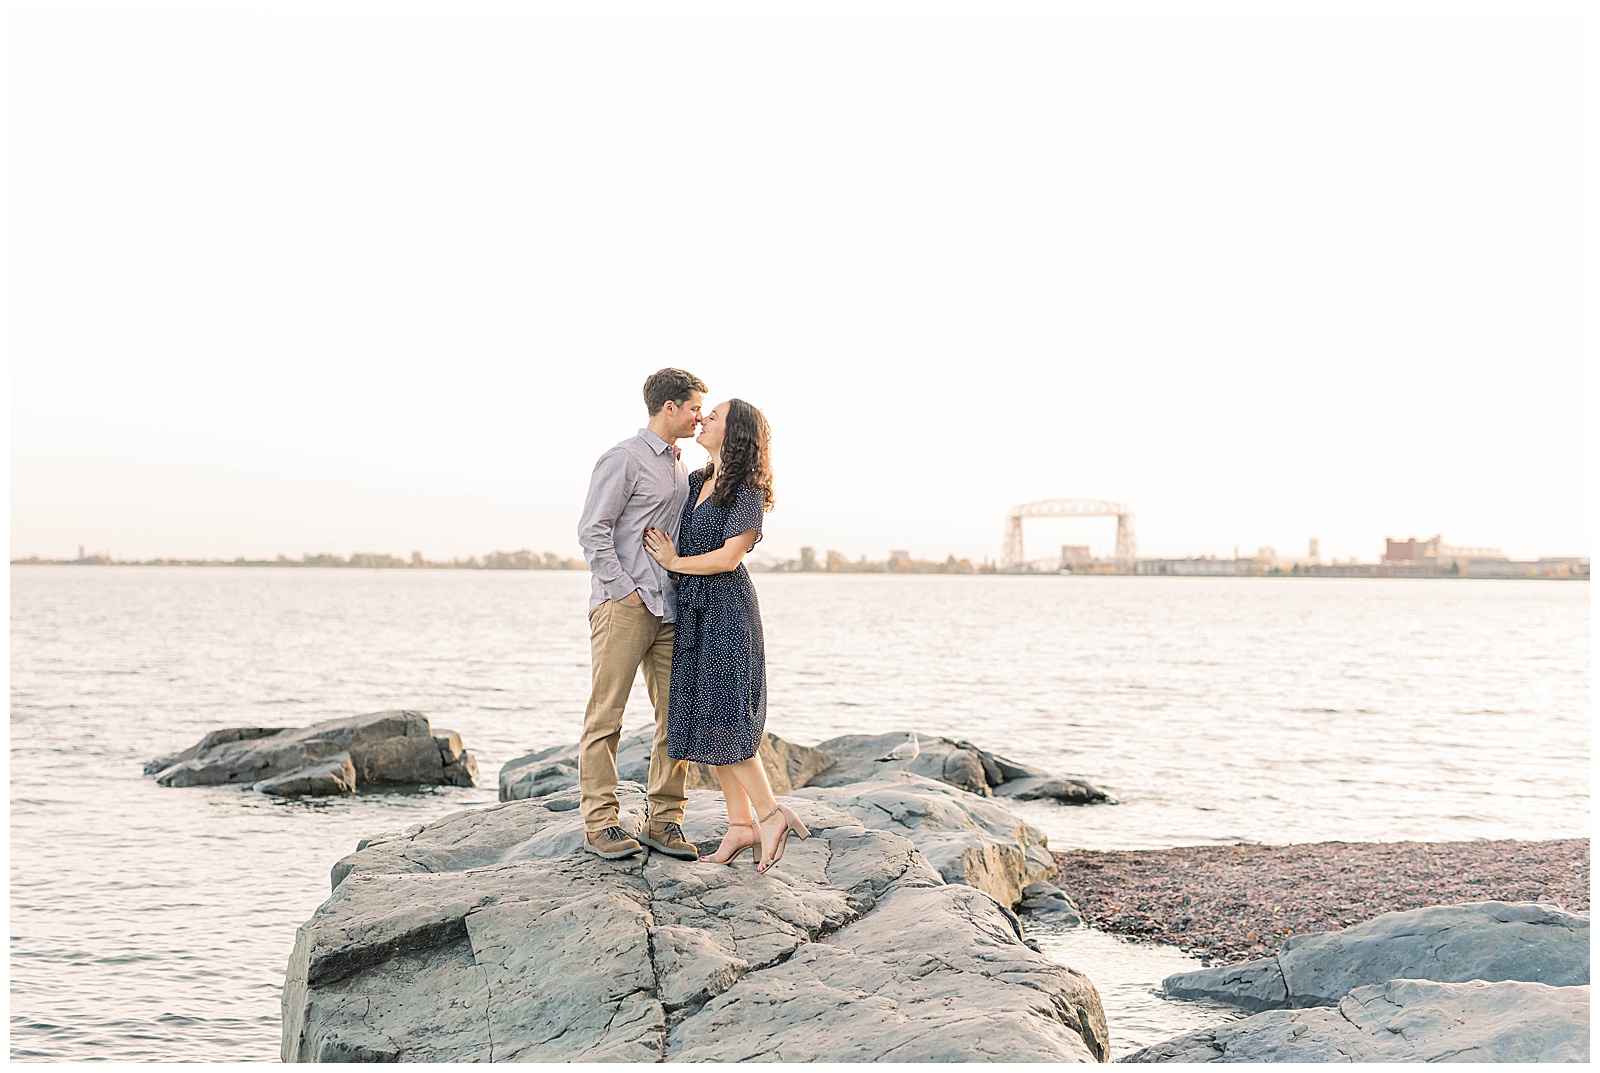 Ayu Ting Ting Sex - Hartley Nature Center and Leif Erickson Park Engagement Session, Duluth MN  - Stephanie Holsman Photography